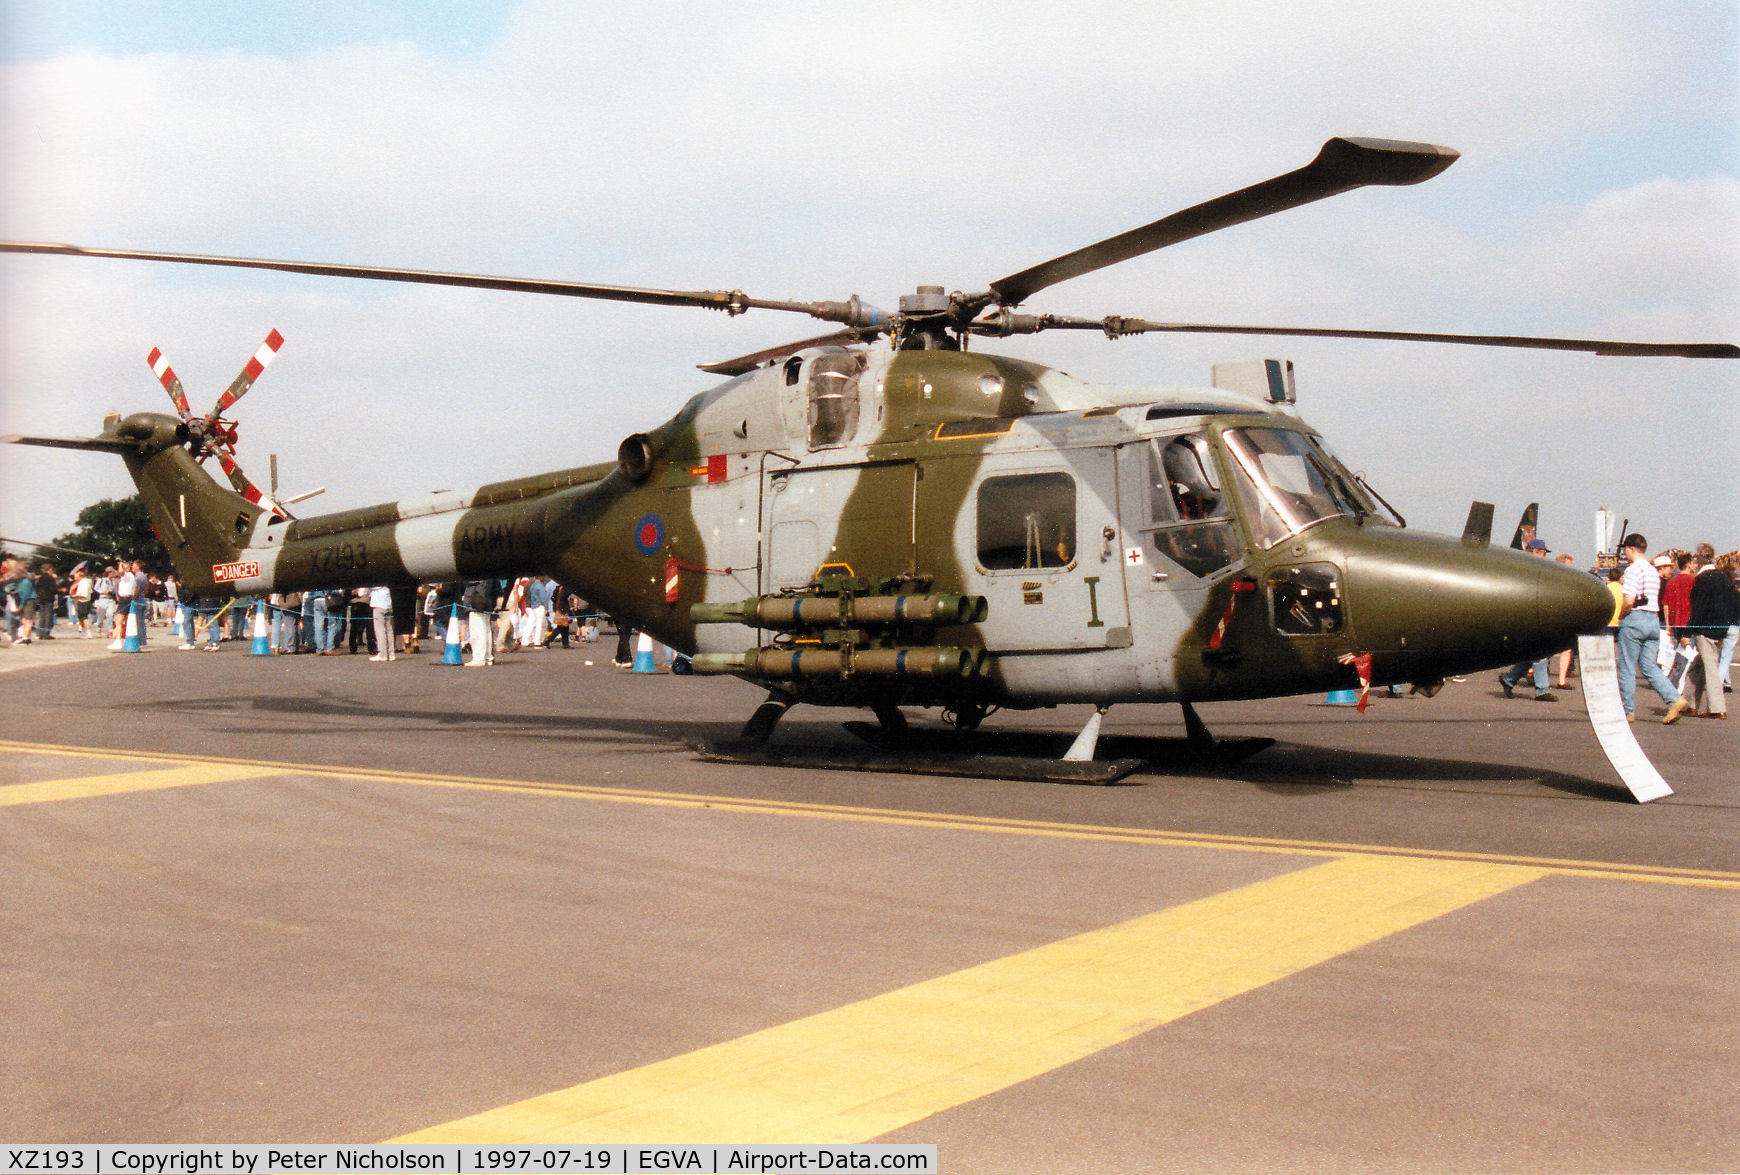 XZ193, 1978 Westland Lynx AH.1 C/N 093, Lynx AH.7, callsign Army Air 075, of 671 Squadron at Middle Wallop on display at the 1997 Intnl Air Tattoo at RAF Fairford.